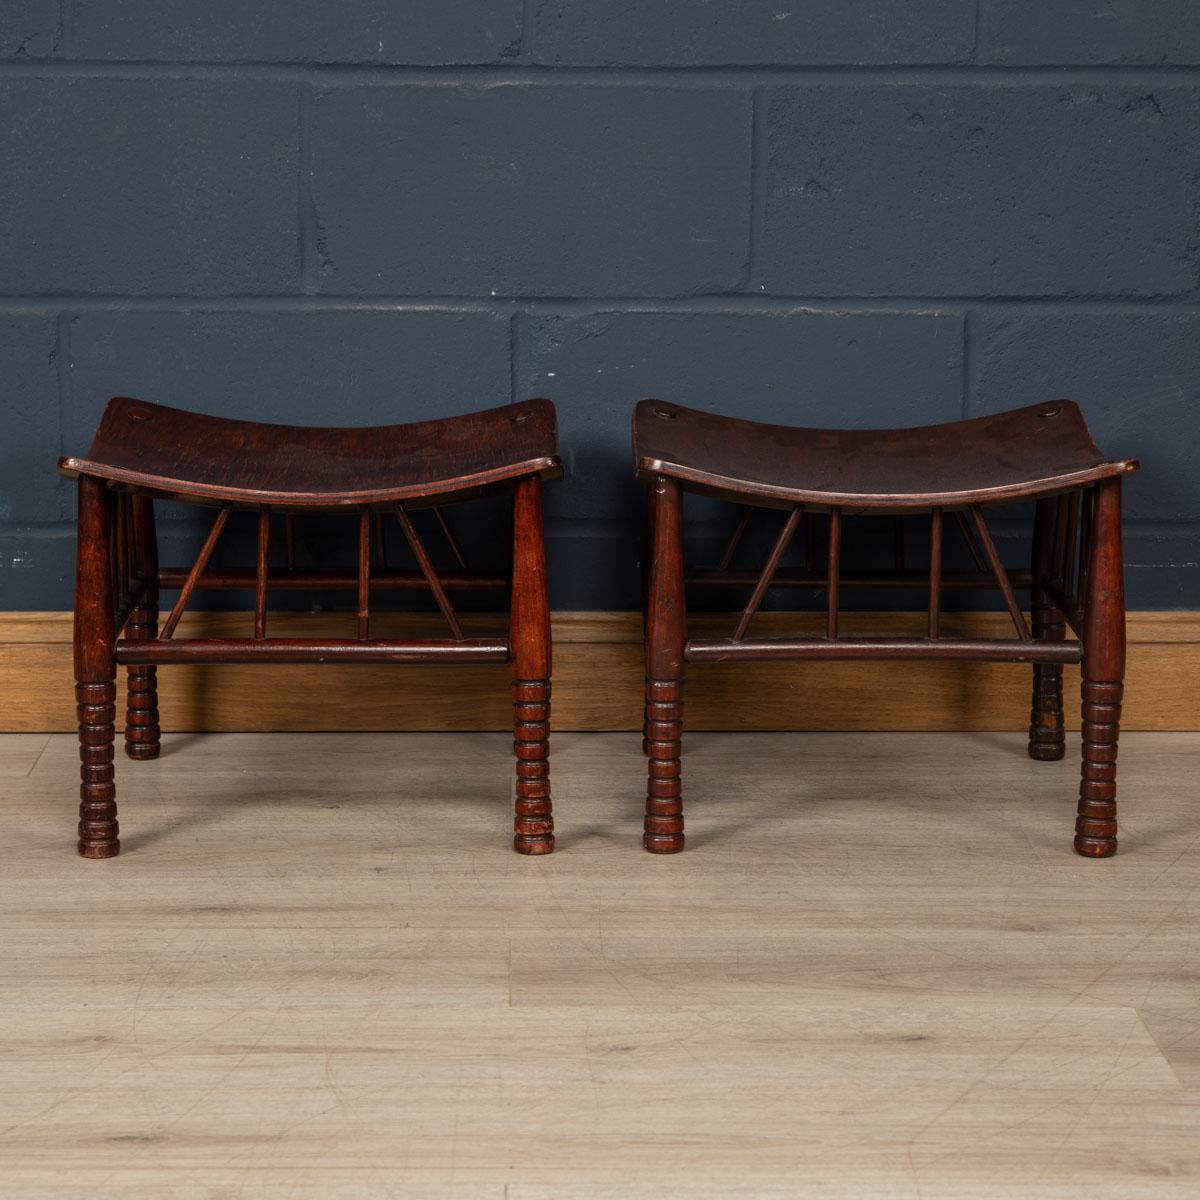 A lovely pair of Thebes stools attributable to Liberty and Company in London. The inspiration for the Thebes stool was the collection of Egyptian domestic antique furniture discovered at Thebes in Egypt which had been acquired by the British Museum